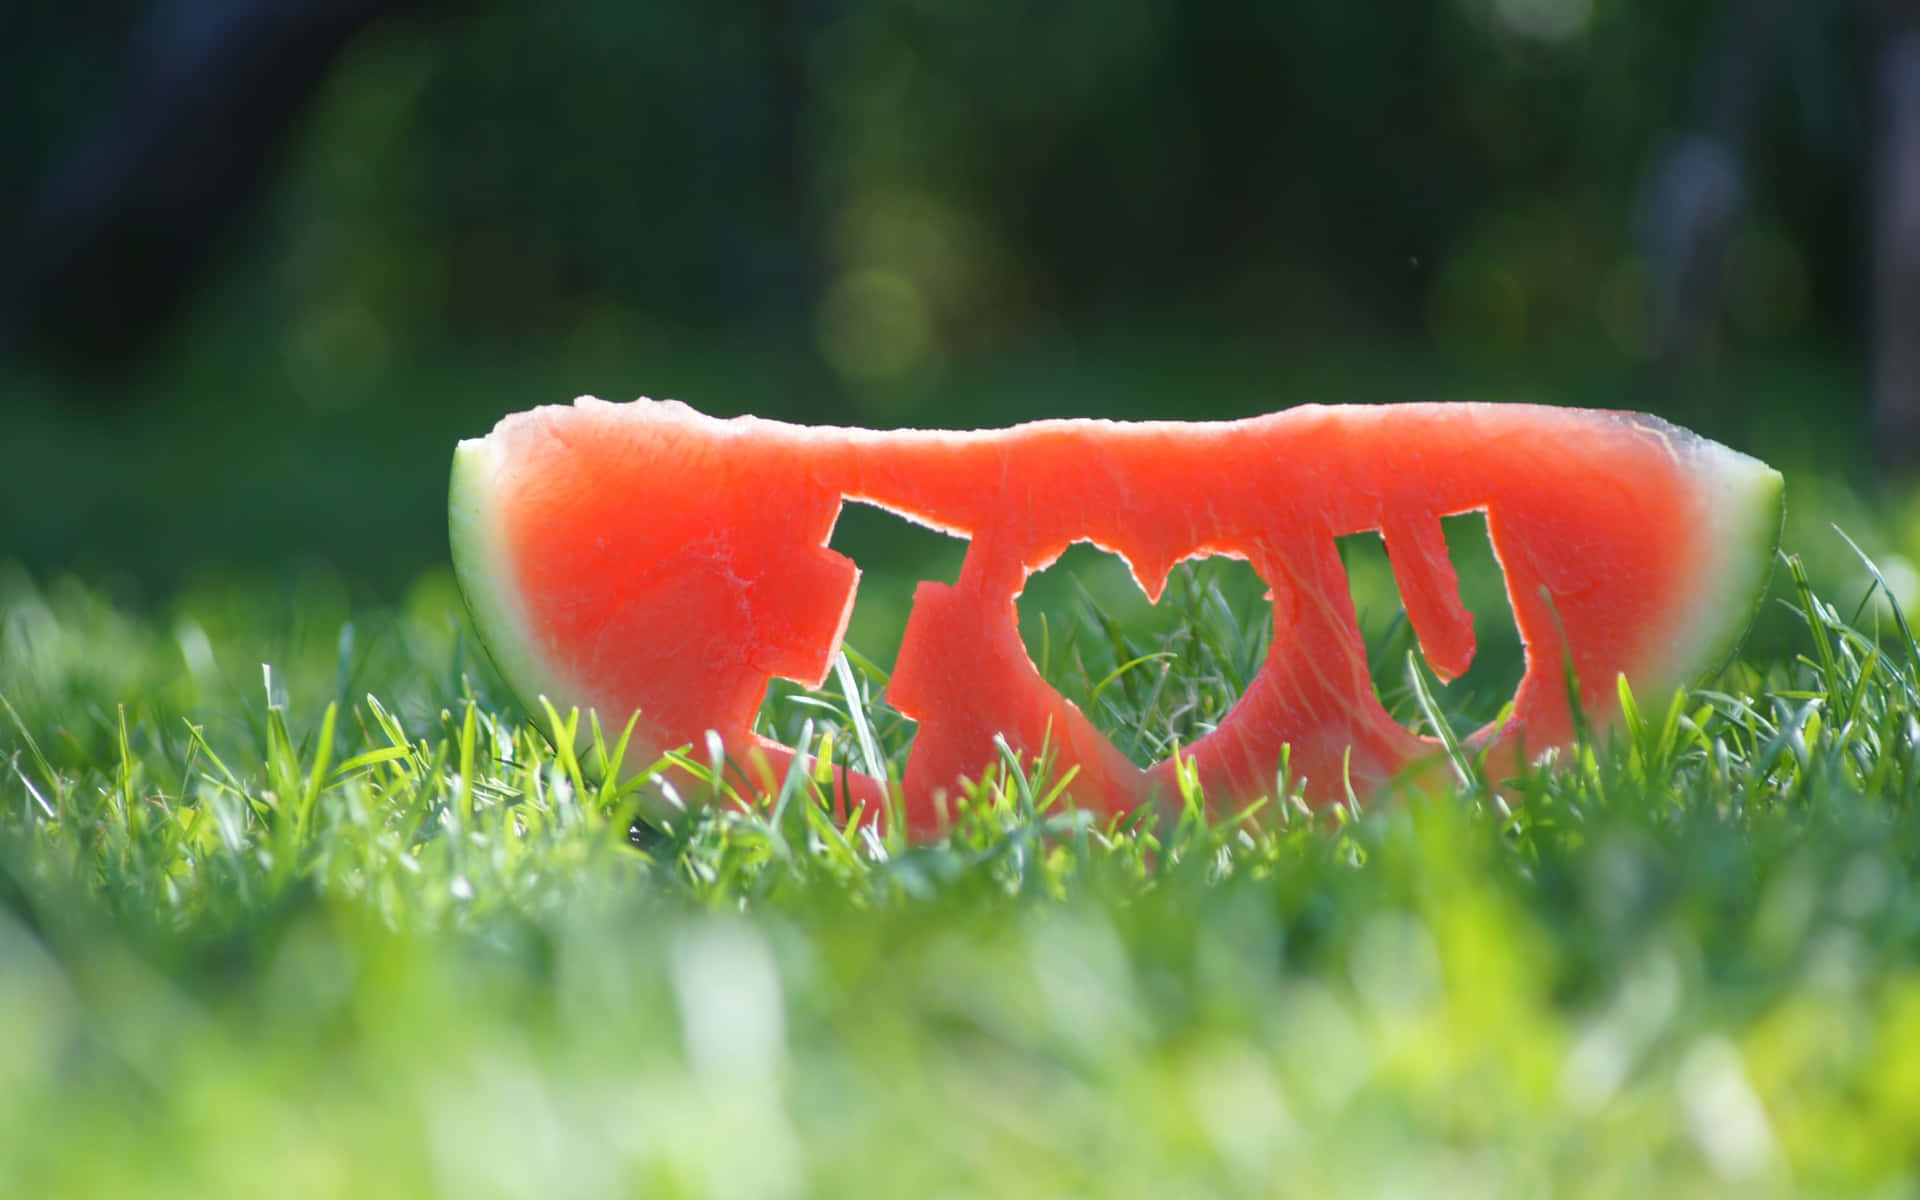 I Love You On Sliced Watermelon Background